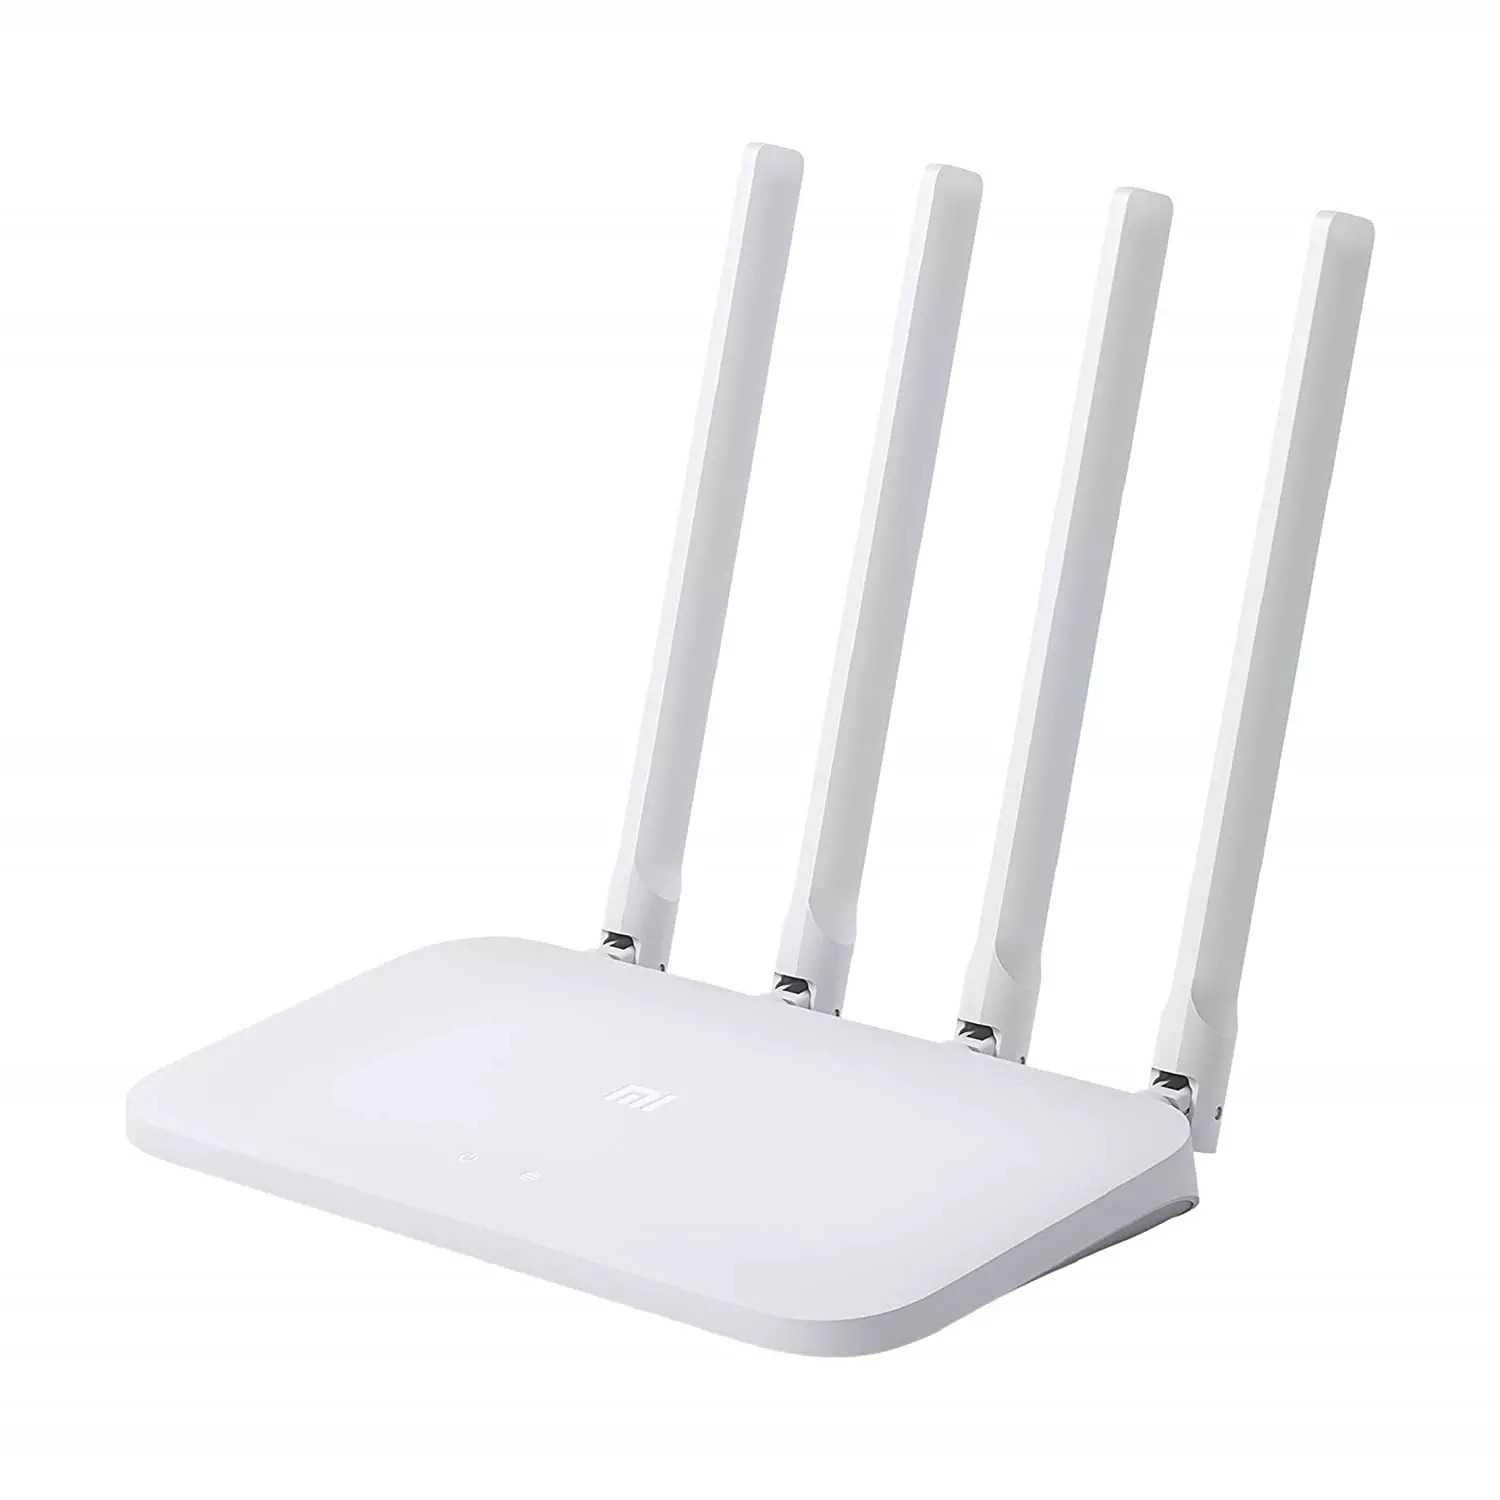 Sanctuary Uncle or Mister after that Home Wifi Tips: How to optimize your router to get maximum WiFi speeds at  home - Smartprix